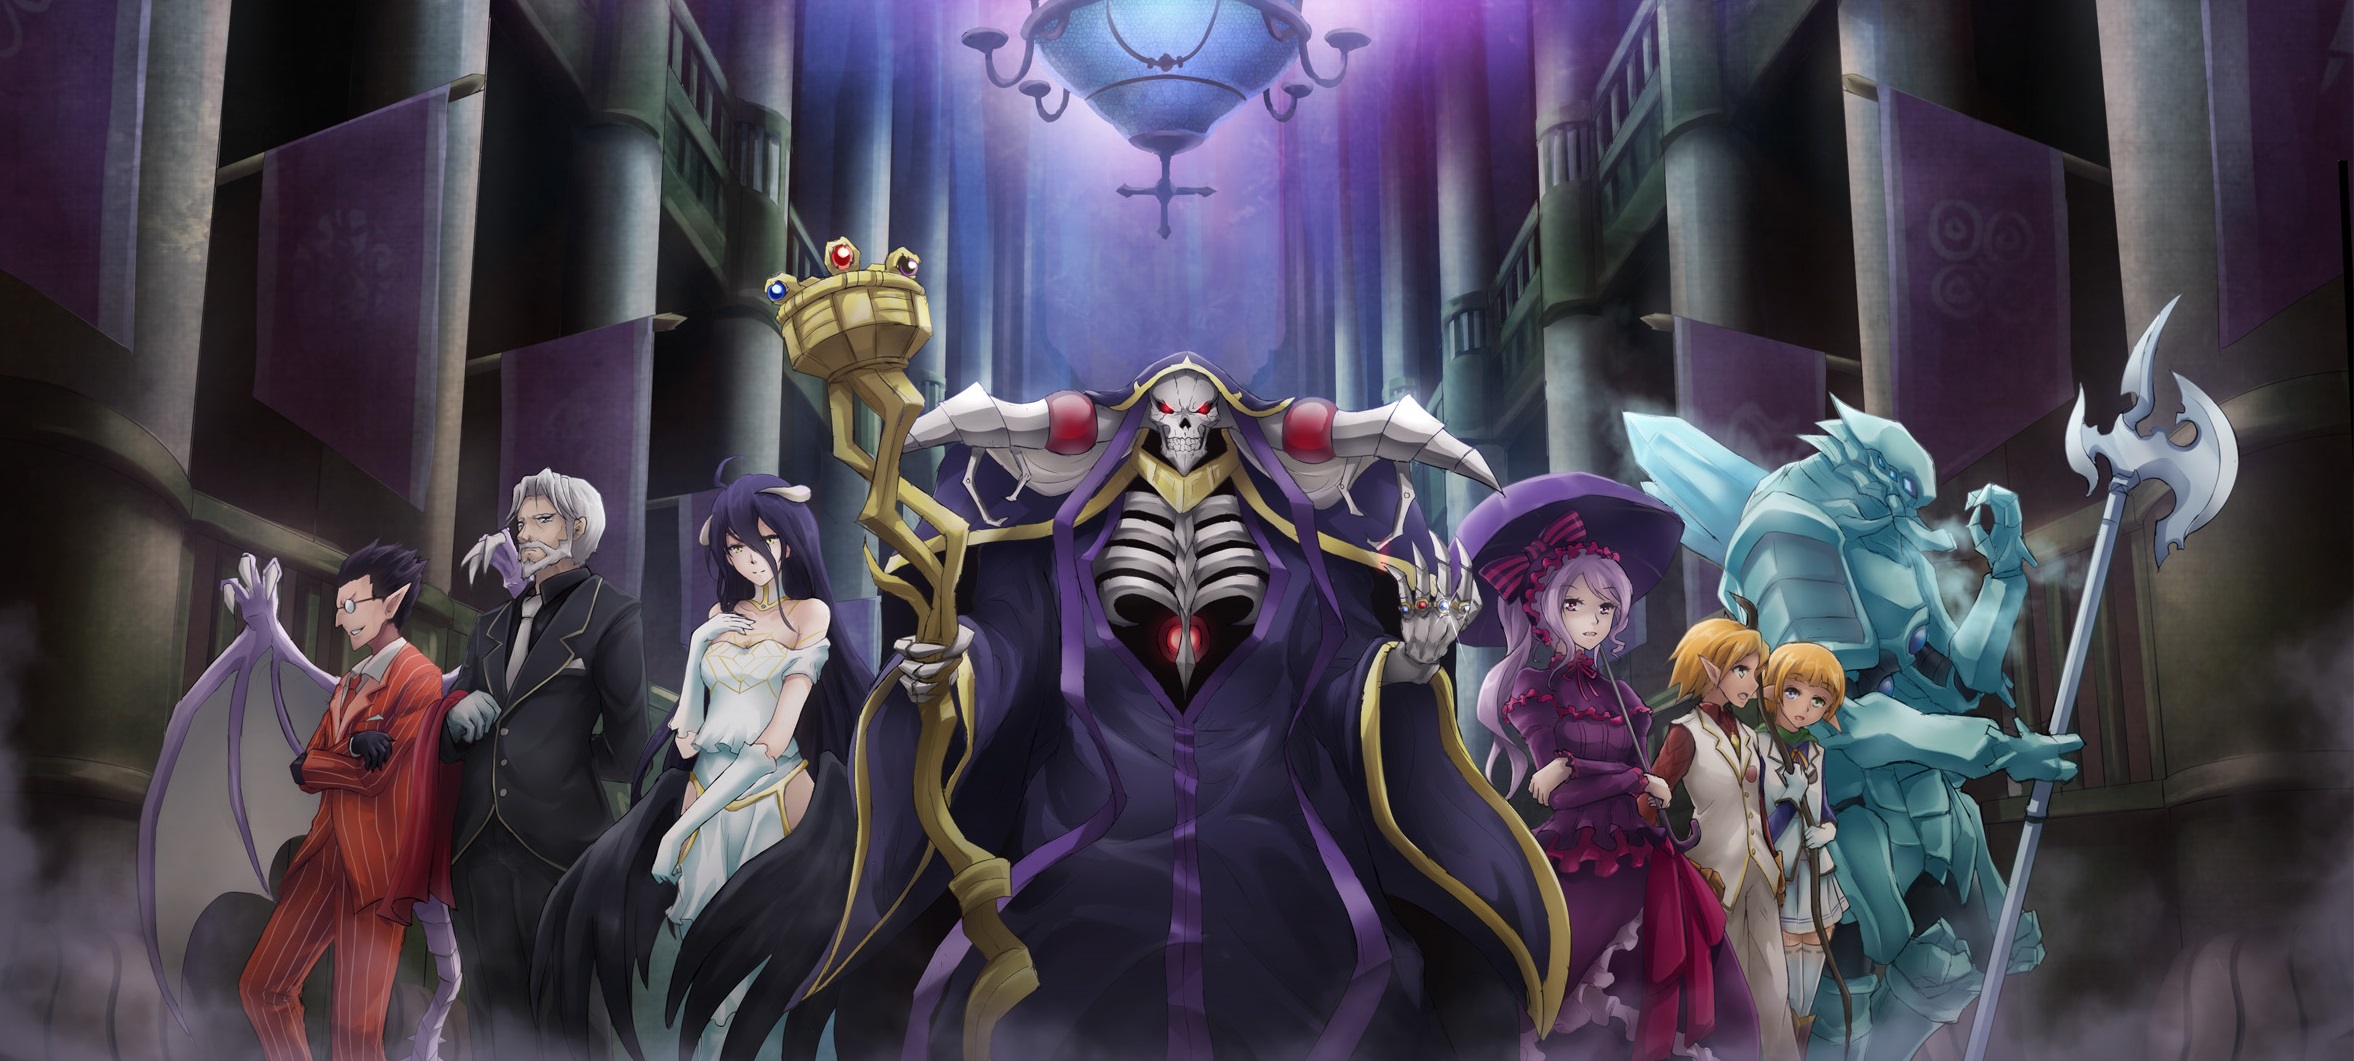 demiurge (overlord), cocytus (overlord), overlord, anime, ainz ooal gown, albedo (overlord), aura bella fiora, great tomb of nazarick, mare bello fiore, sebas tian, shalltear bloodfallen 32K